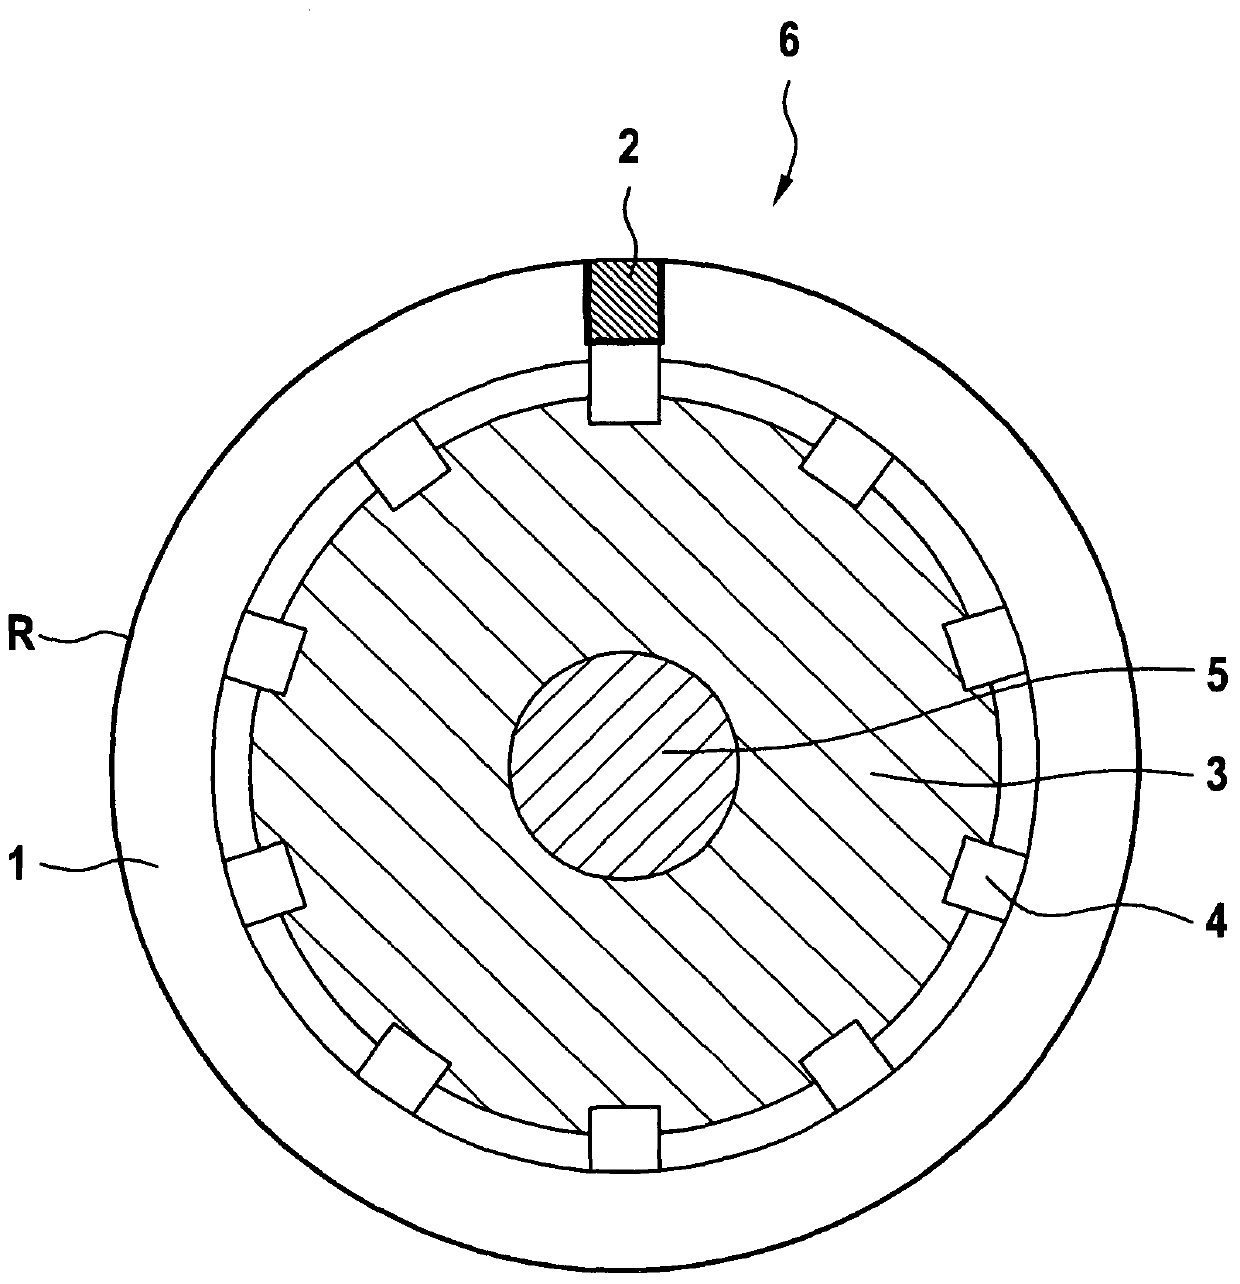 Arrangement for winding a web of material